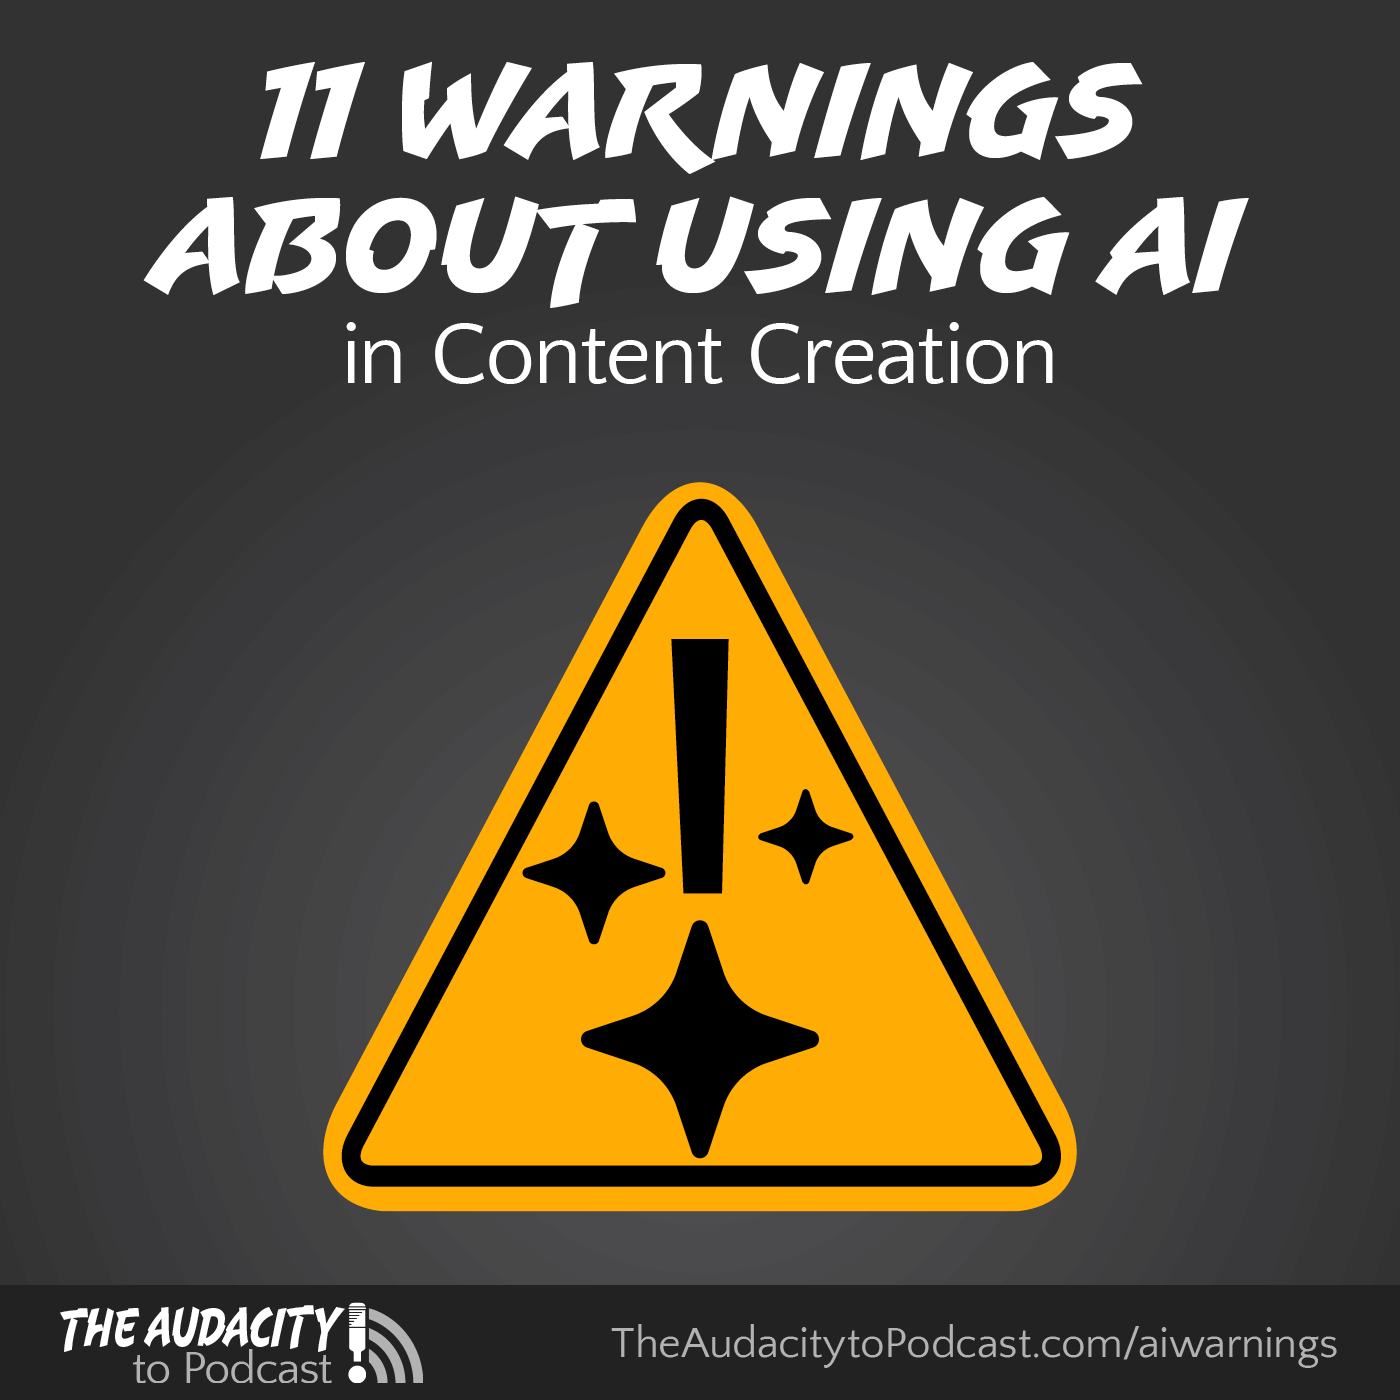 11 Warnings about Using AI in Content-Creation (including podcasting)